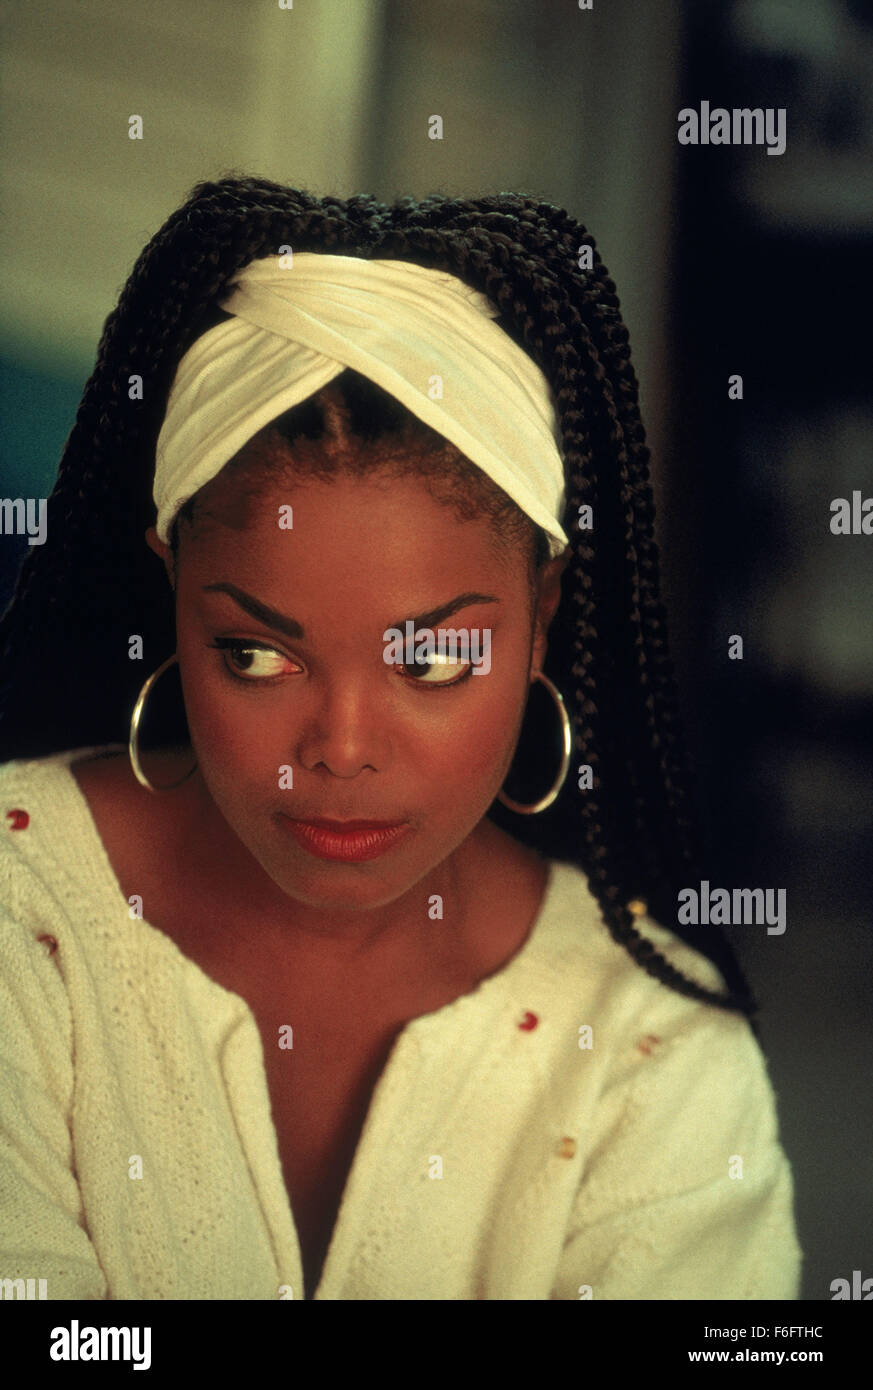 RELEASE DATE: 23 July 1993. MOVIE TITLE: Poetic Justice. STUDIO: Columbia Pictures Corporation. PLOT: In this film, we see the world through the eyes of main character Justice, a young African-American poet. PICTURED: JANET JACKSON as Justice. Stock Photo